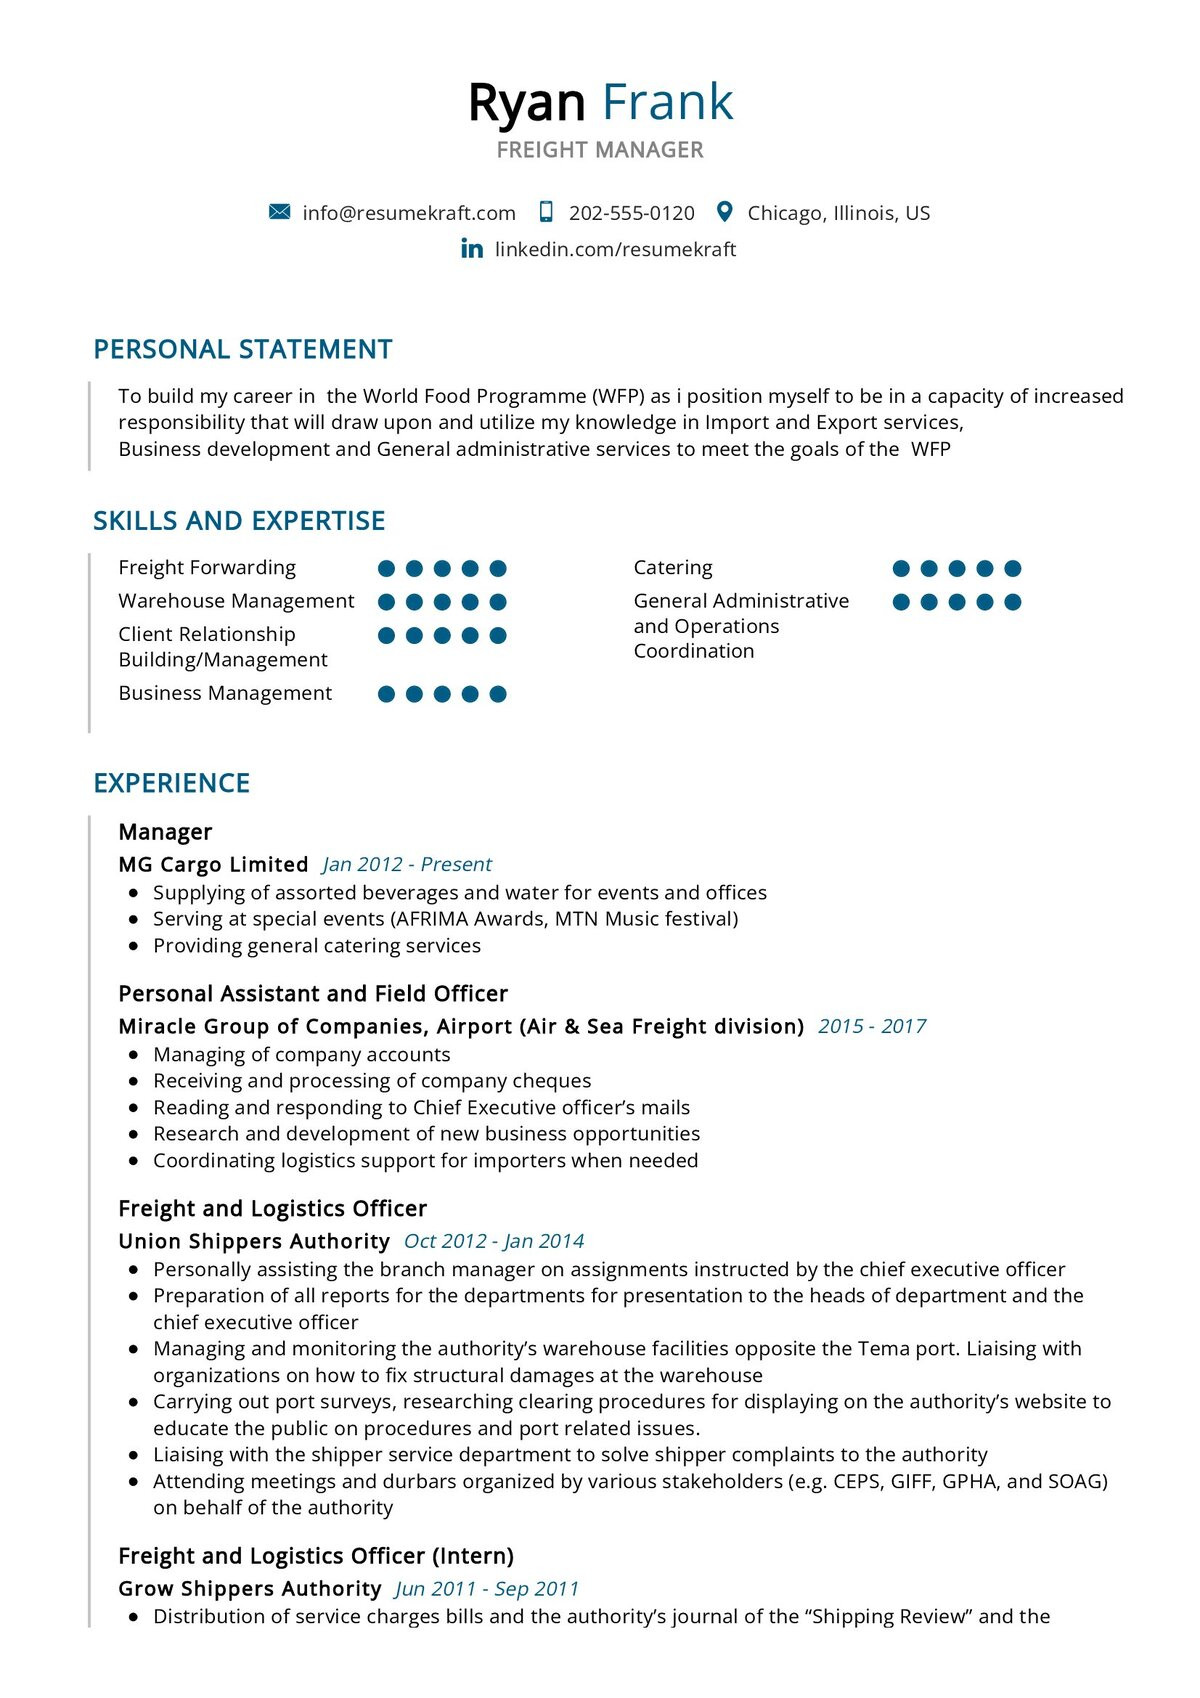 Sample Resume for Customer Service for the Export Industry Freight Manager Resume Example 2022 Writing Tips – Resumekraft